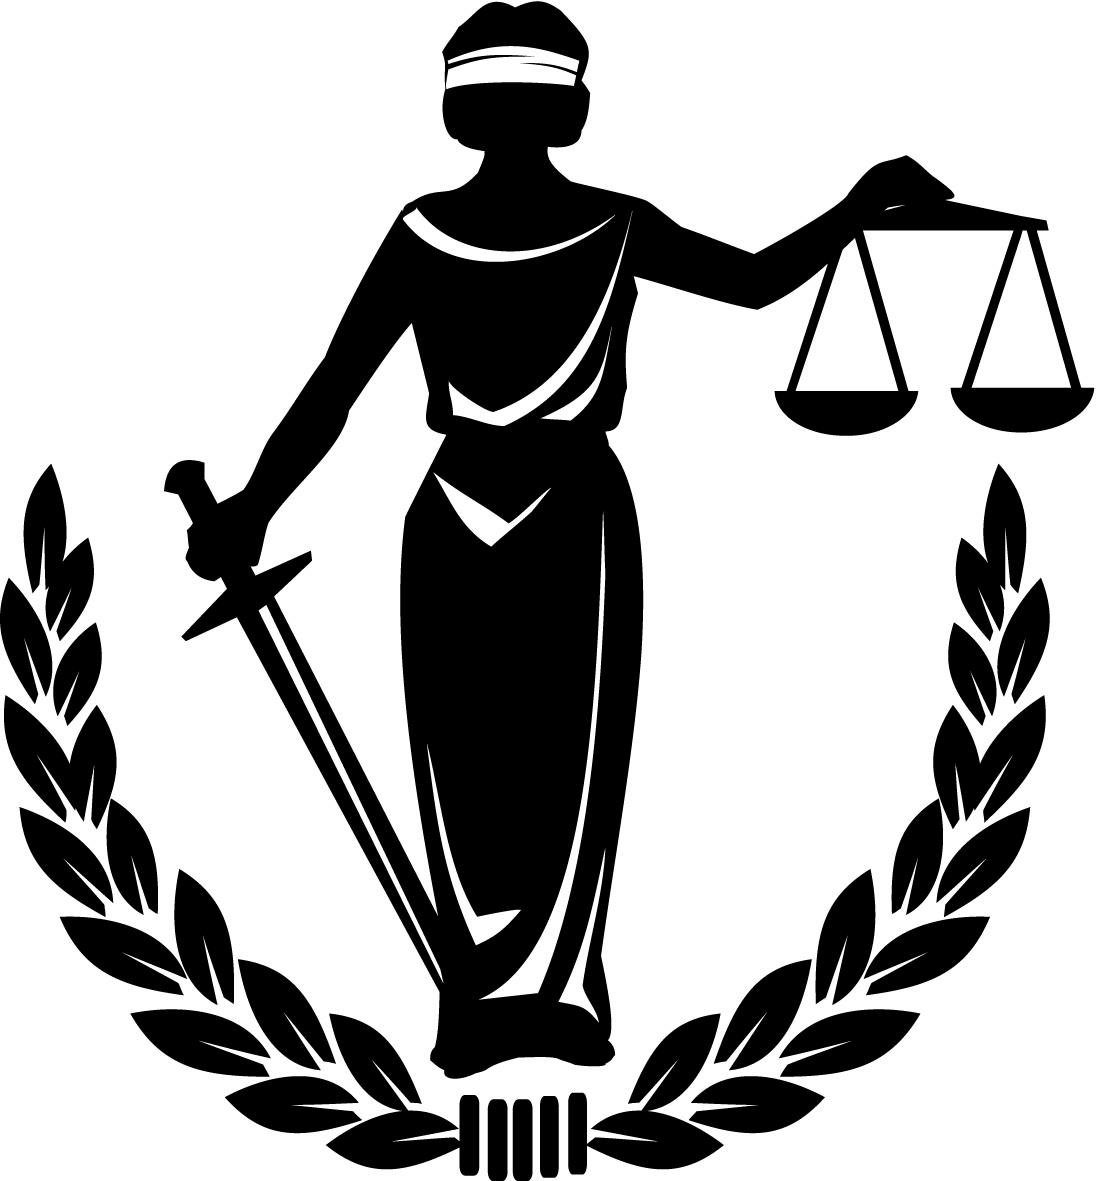 Gavel clipart alleged. Justice google search blonde